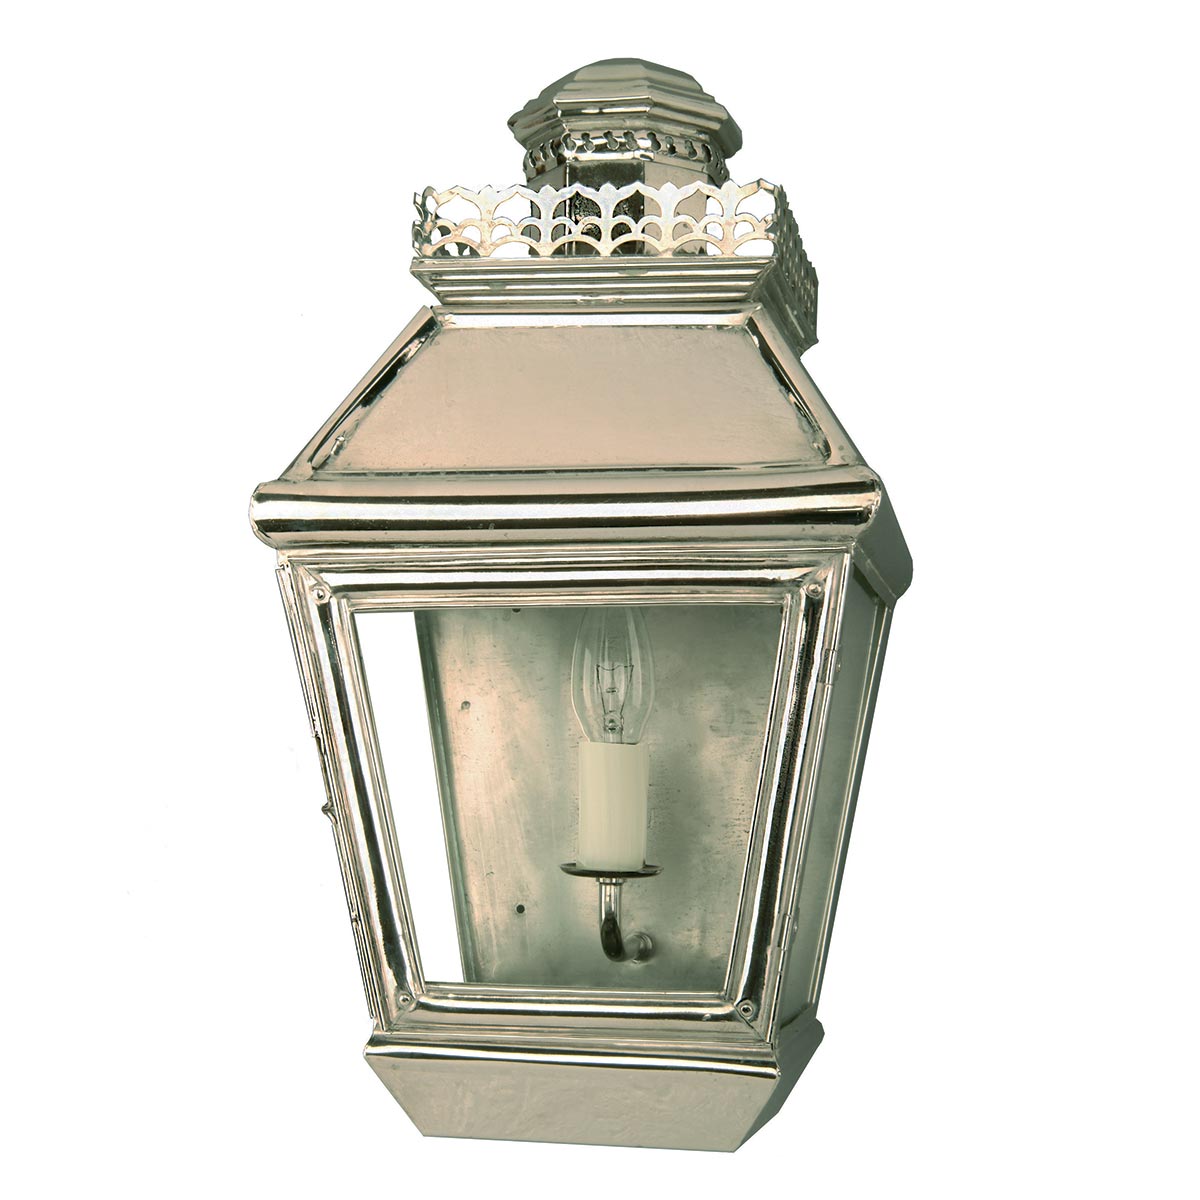 Chateau Victorian Outdoor Wall Passage Lantern Polished Nickel